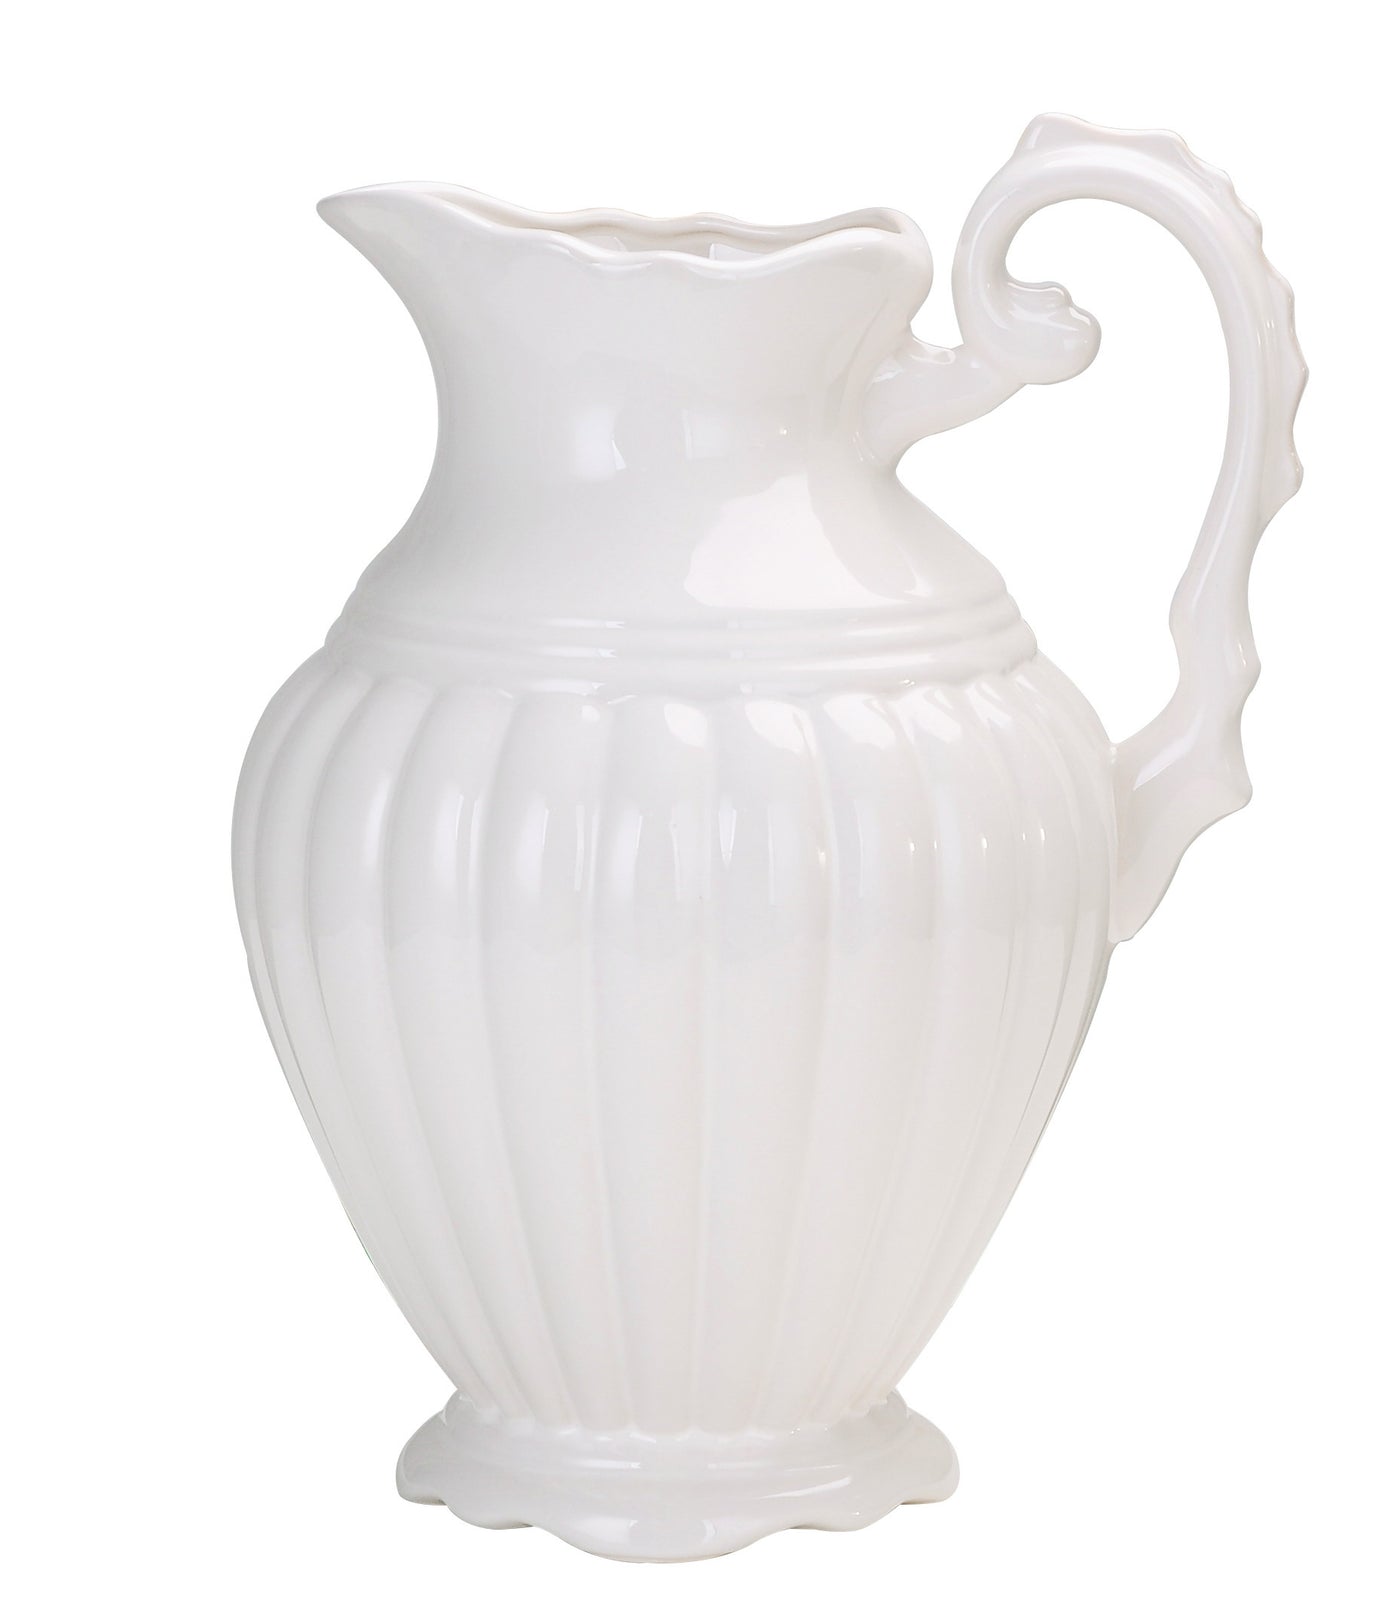 decorative white pitcher for holding flowers